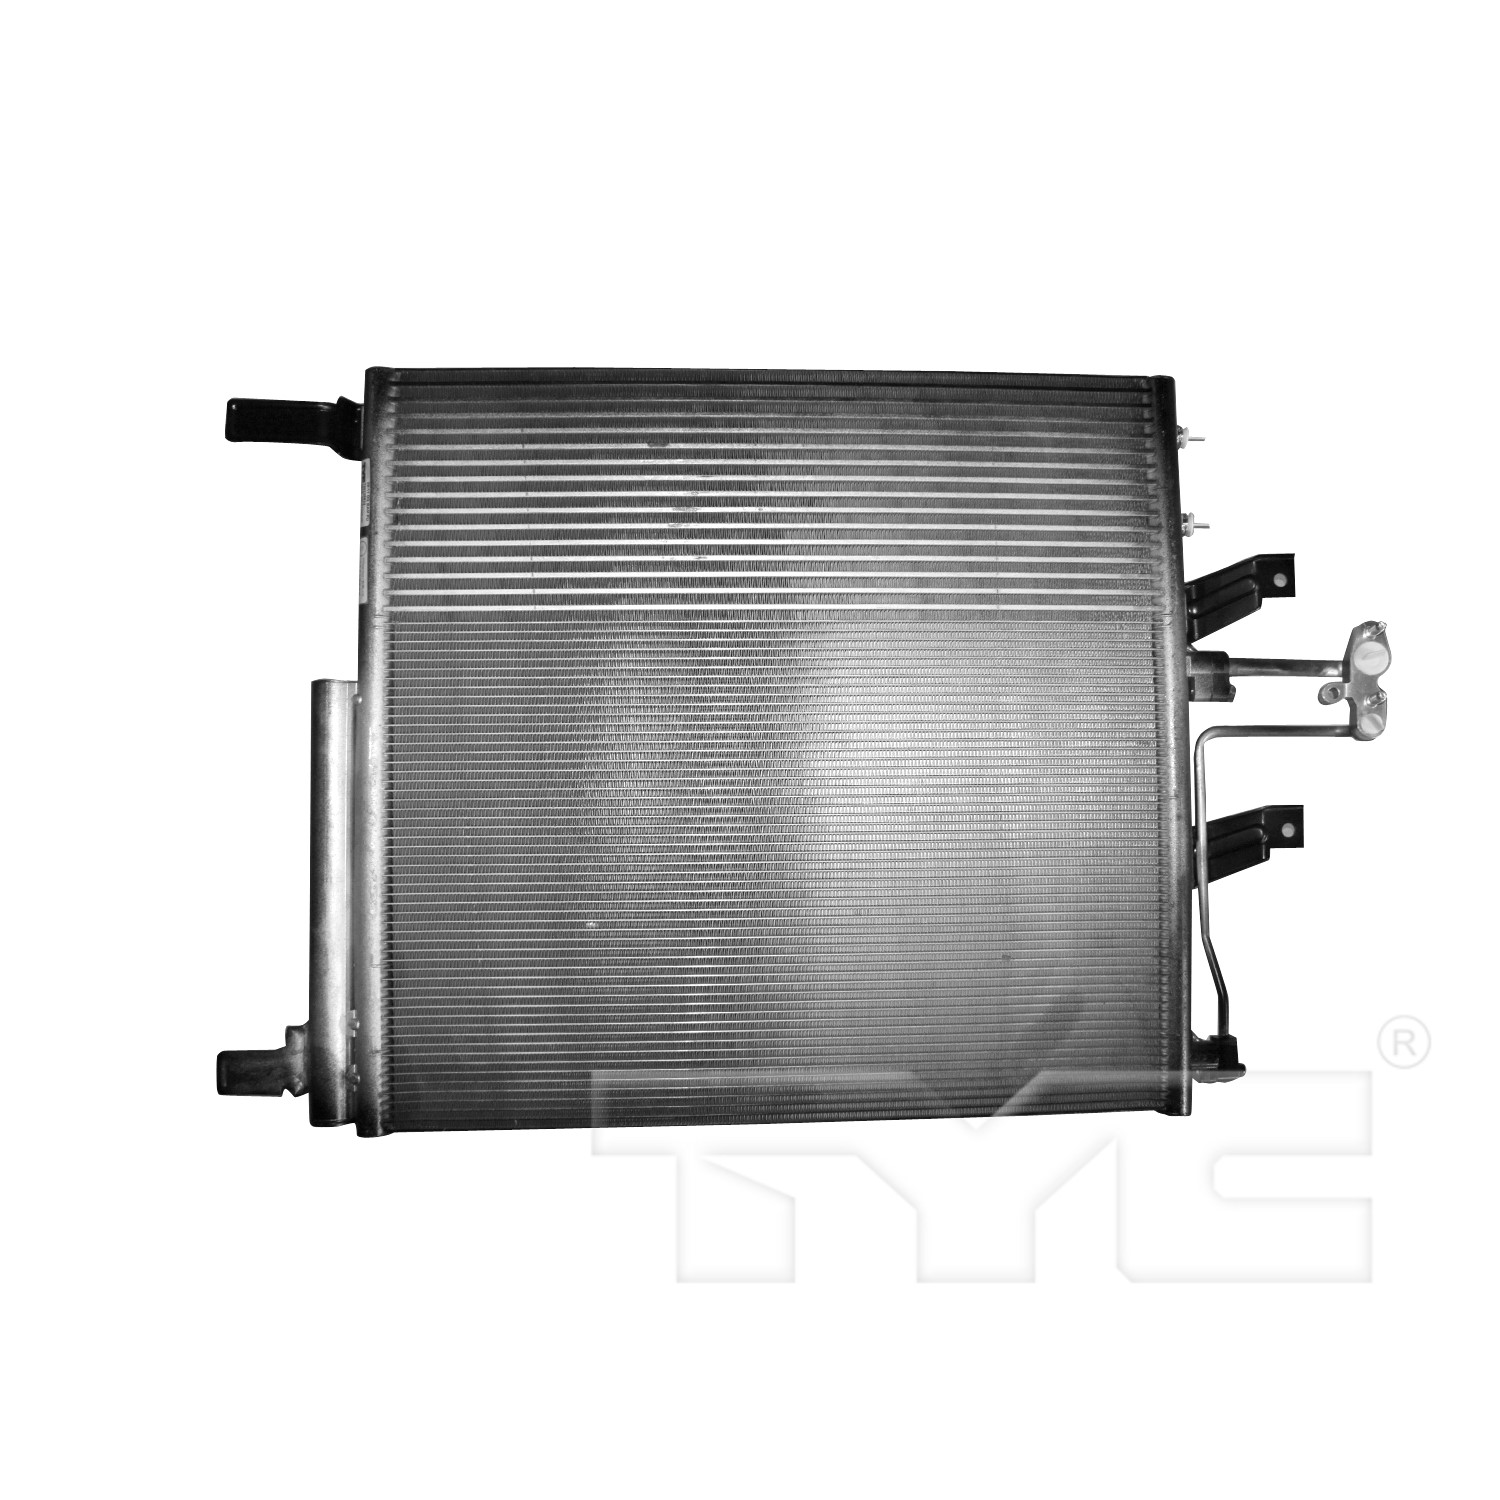 Aftermarket AC CONDENSERS for DODGE - RAM 1500, RAM 1500,09-10,Air conditioning condenser